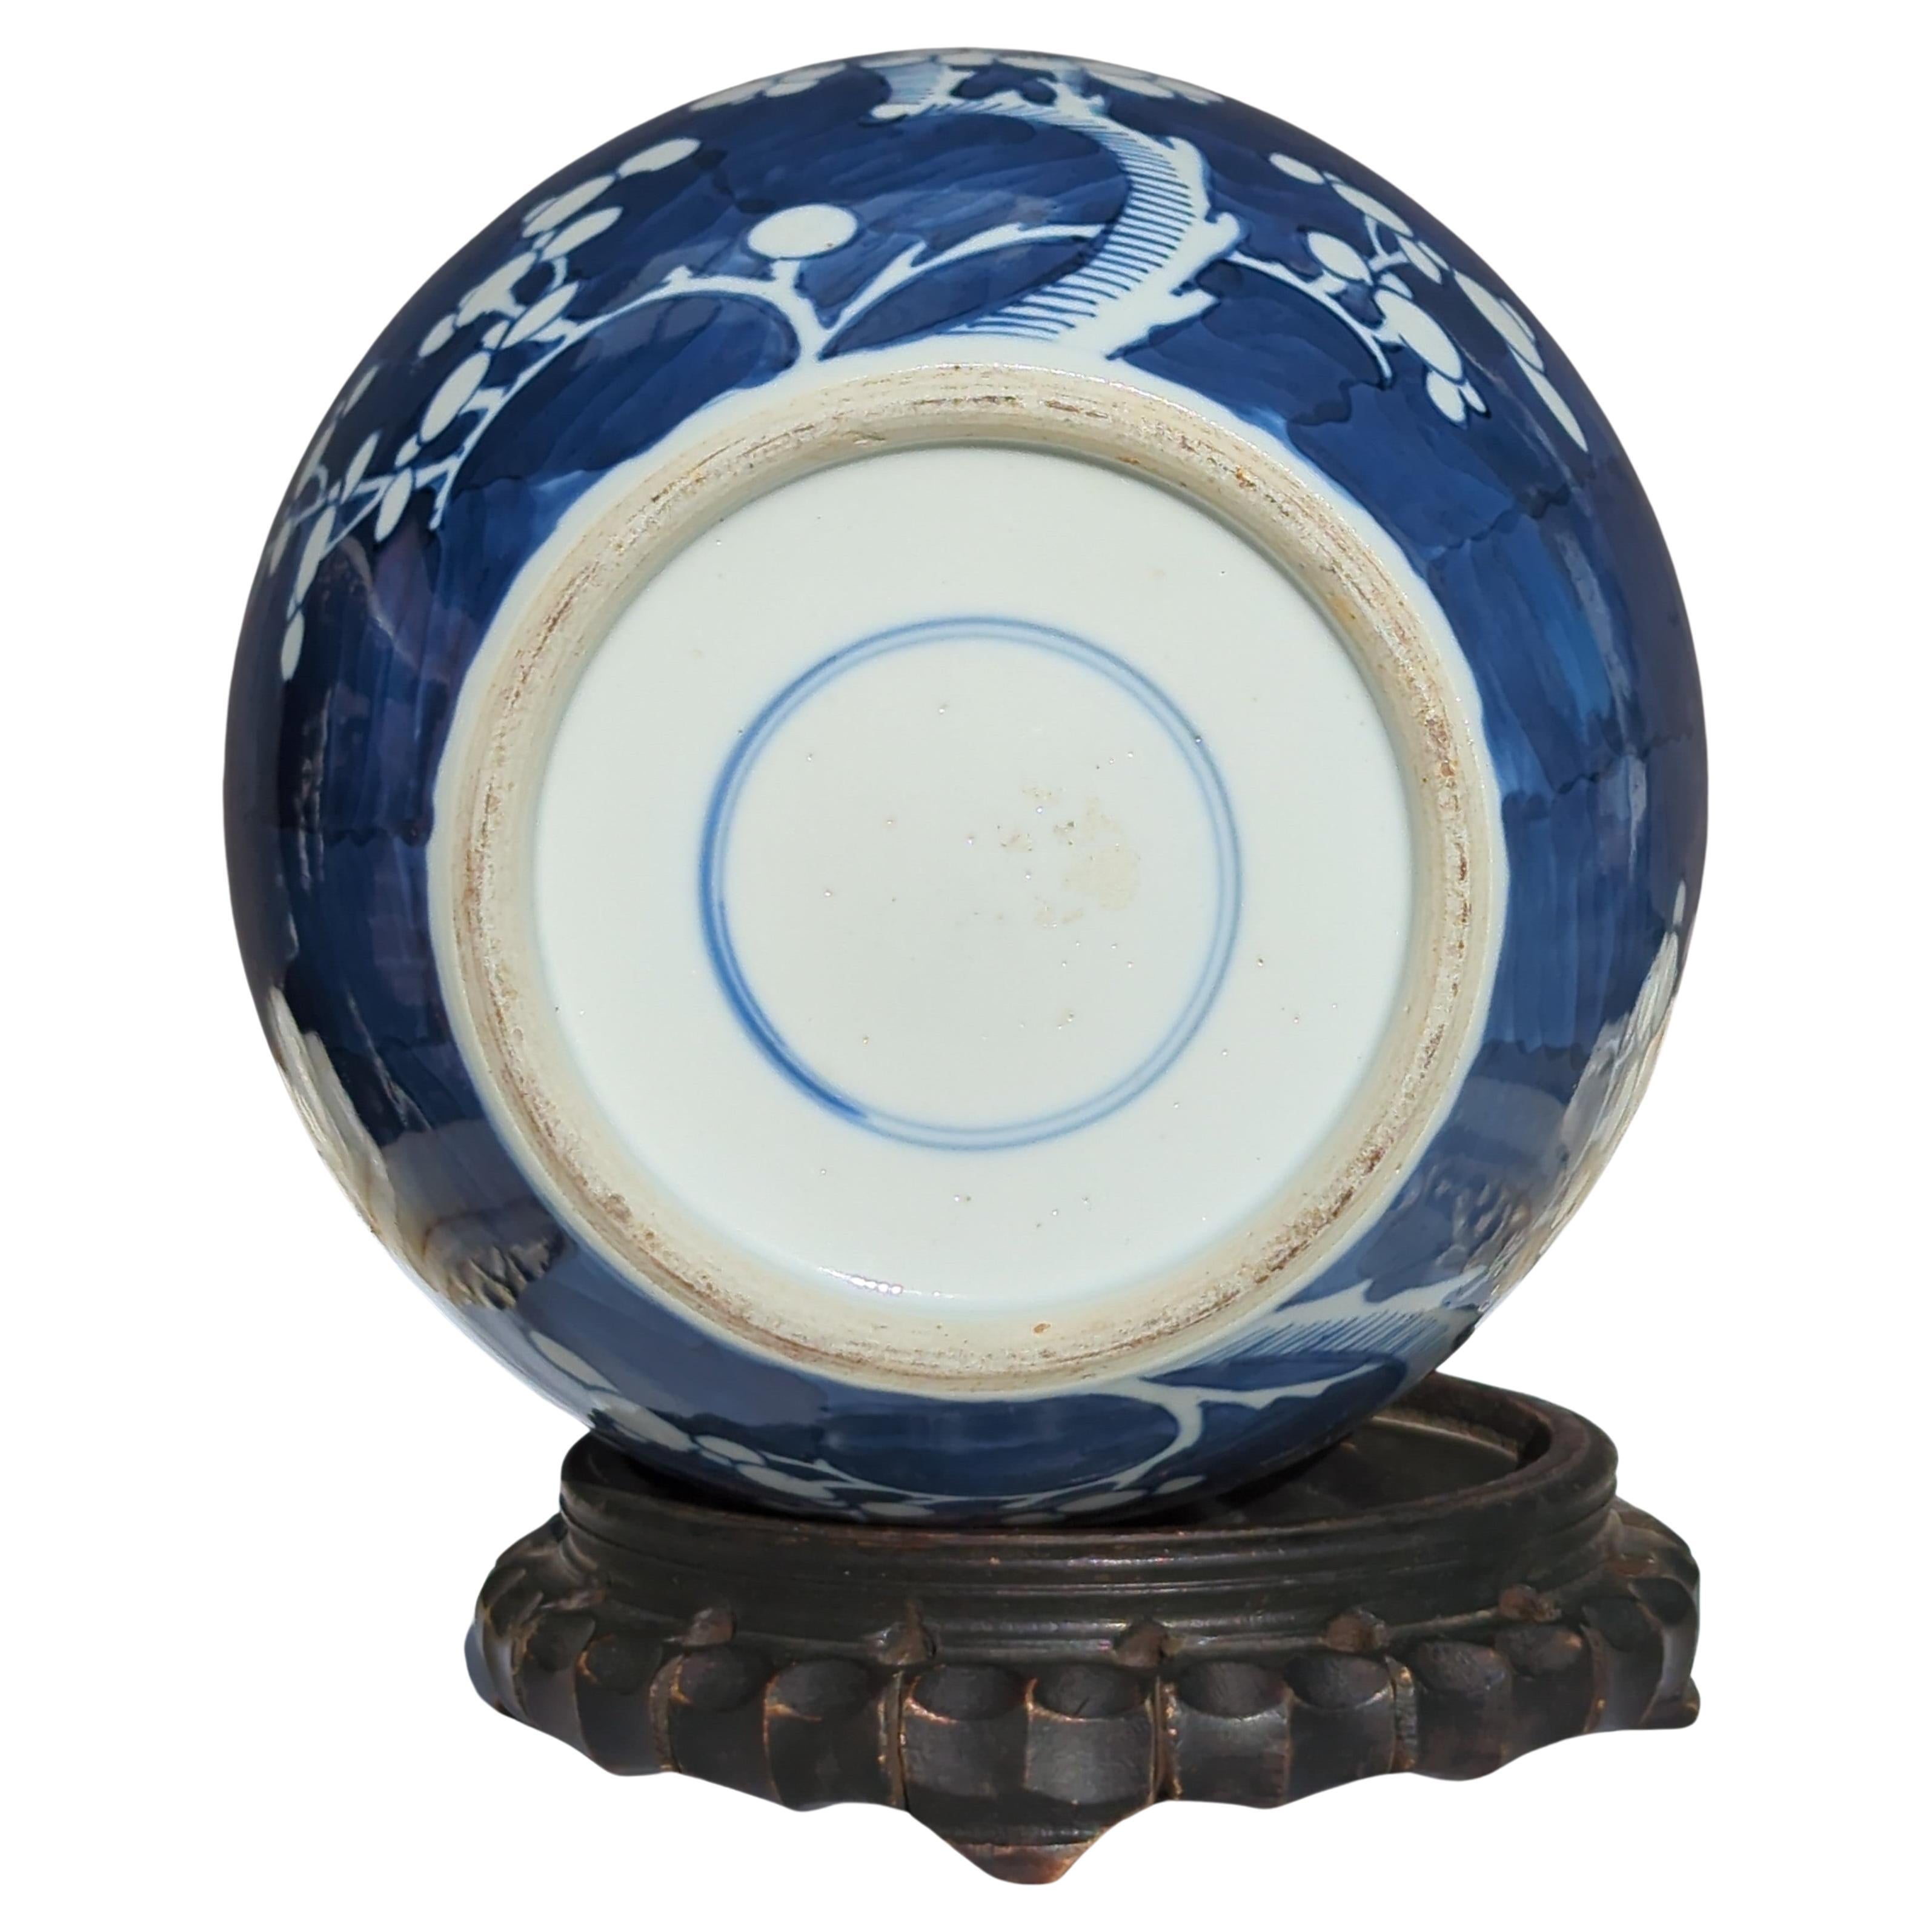 Antique Chinese late Qing dynasty blue and white ginger jar, reserve decorated in underglaze blue and white, with blooming prunus branches on underglaze blue wash ground, and double circle mark in underglaze blue within the footring

Comes with